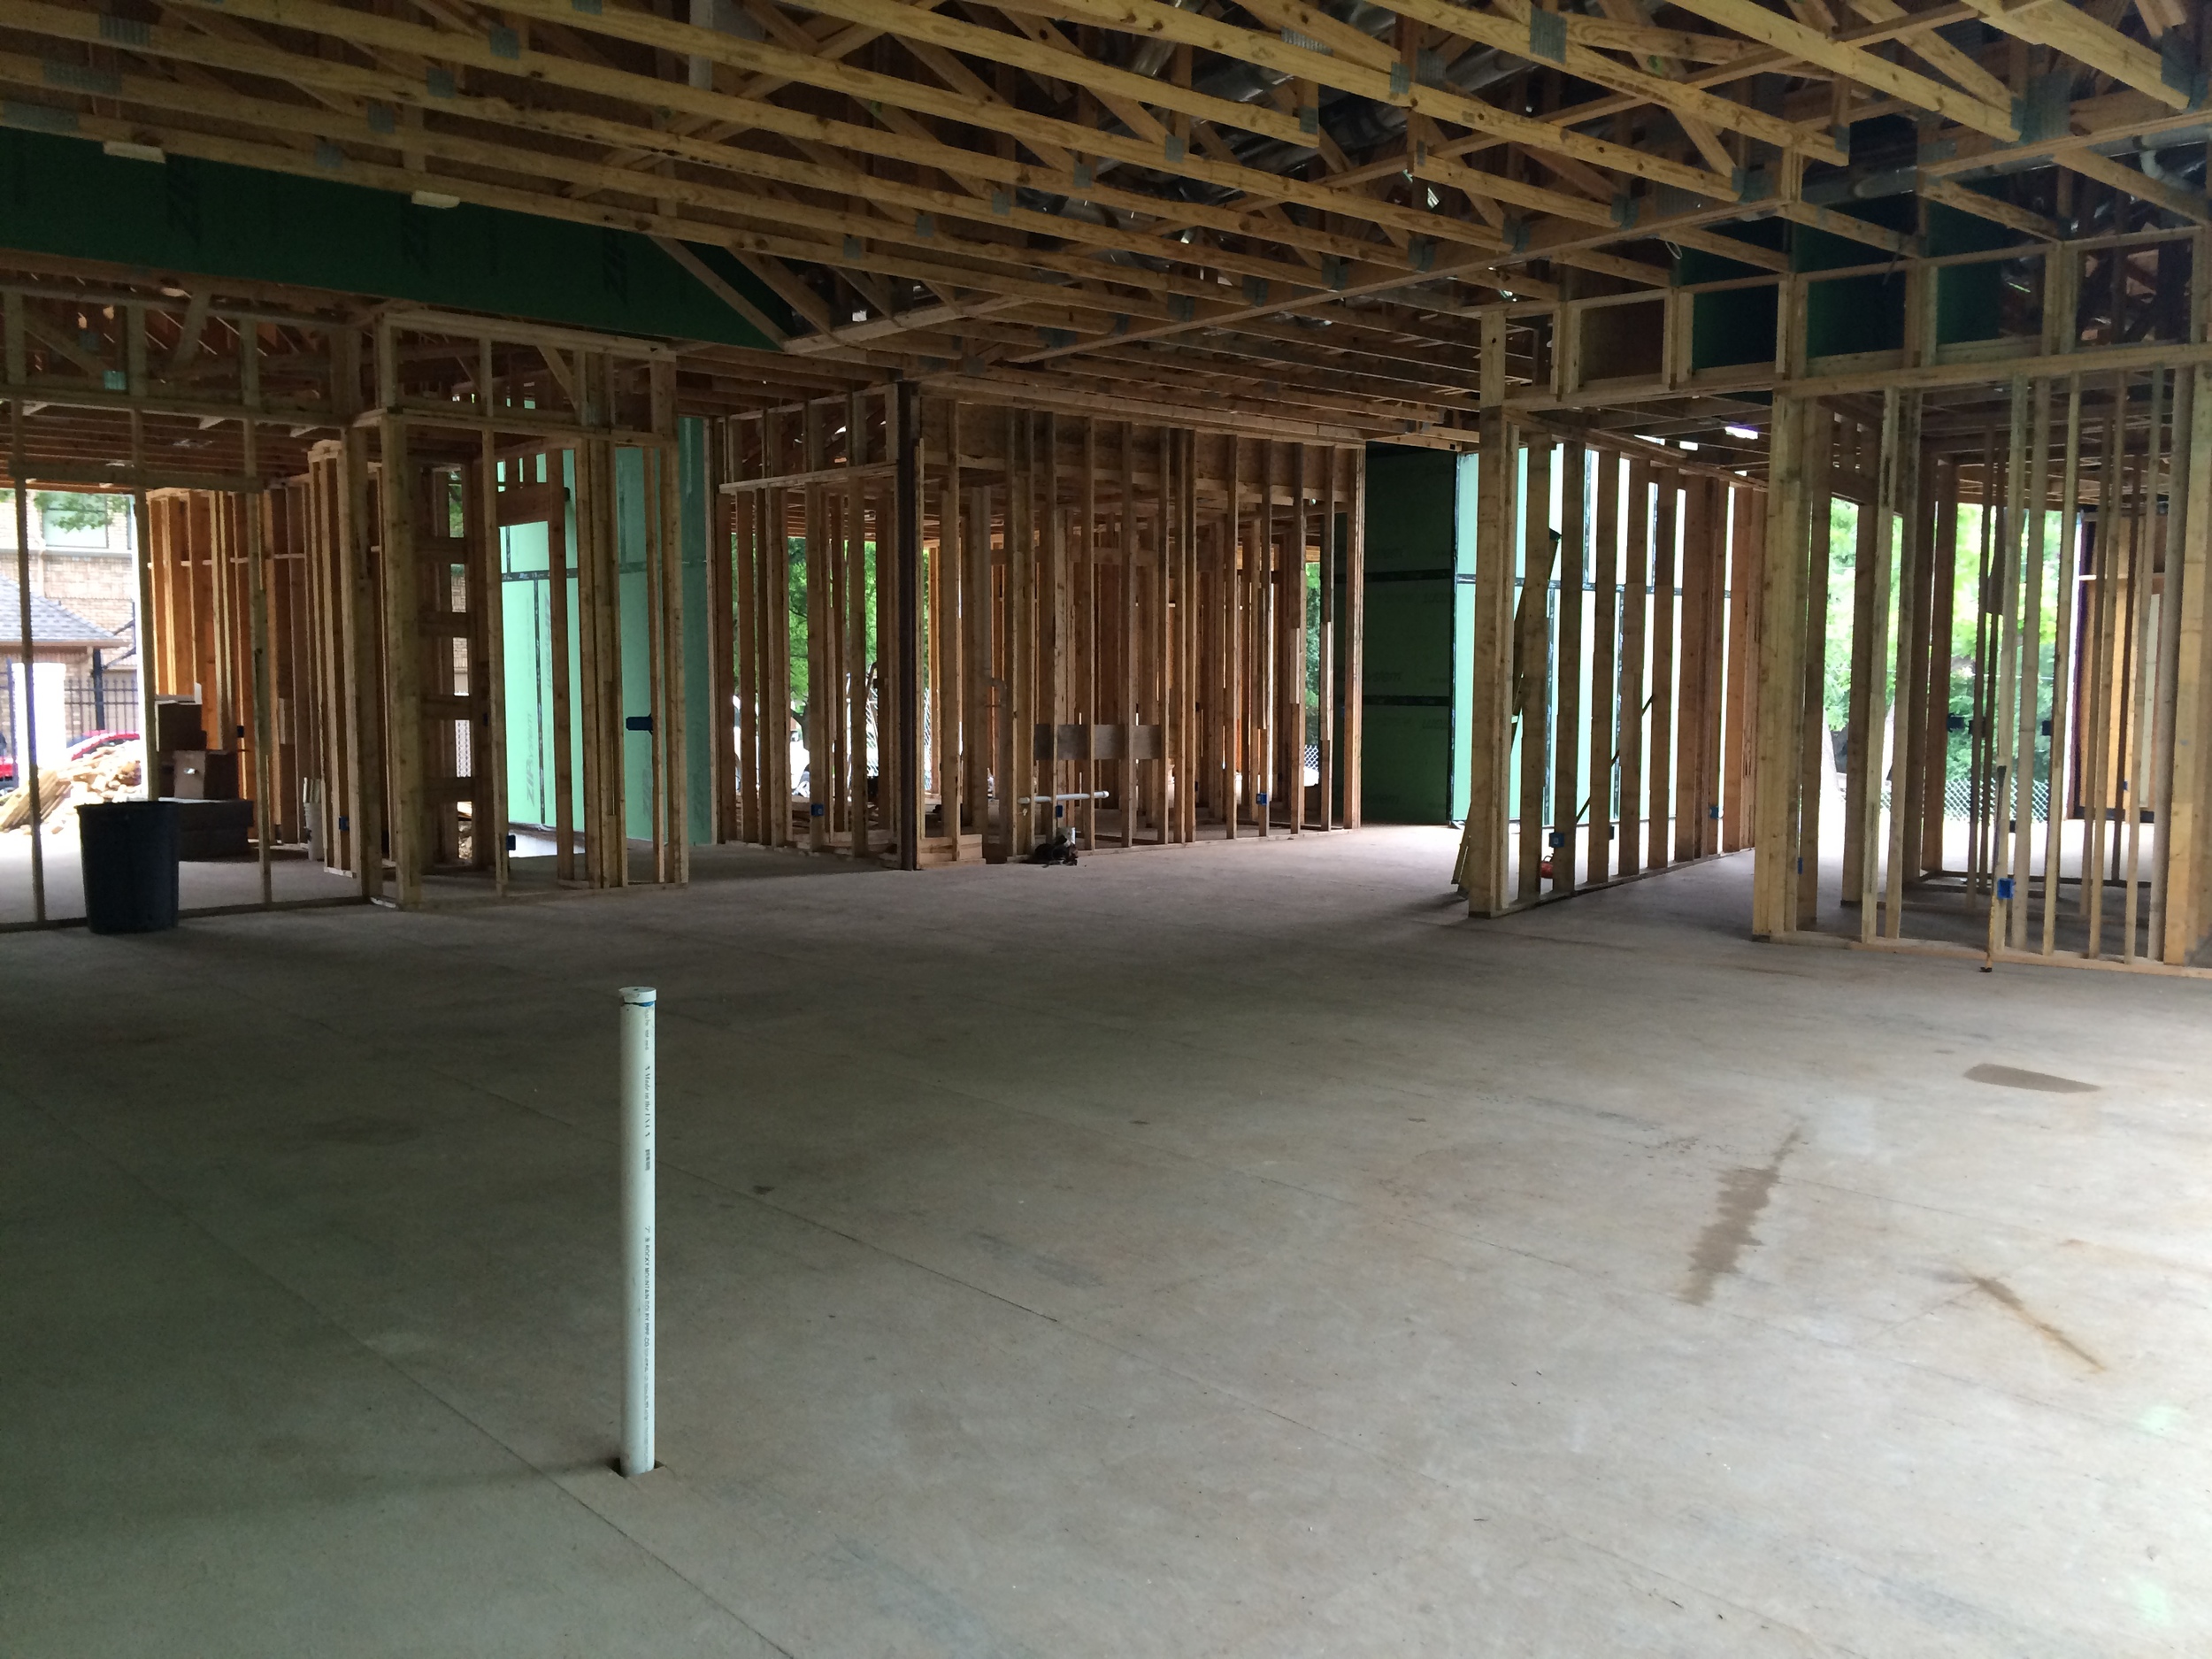 Imaging what this living and dining space will look like once it's complete!